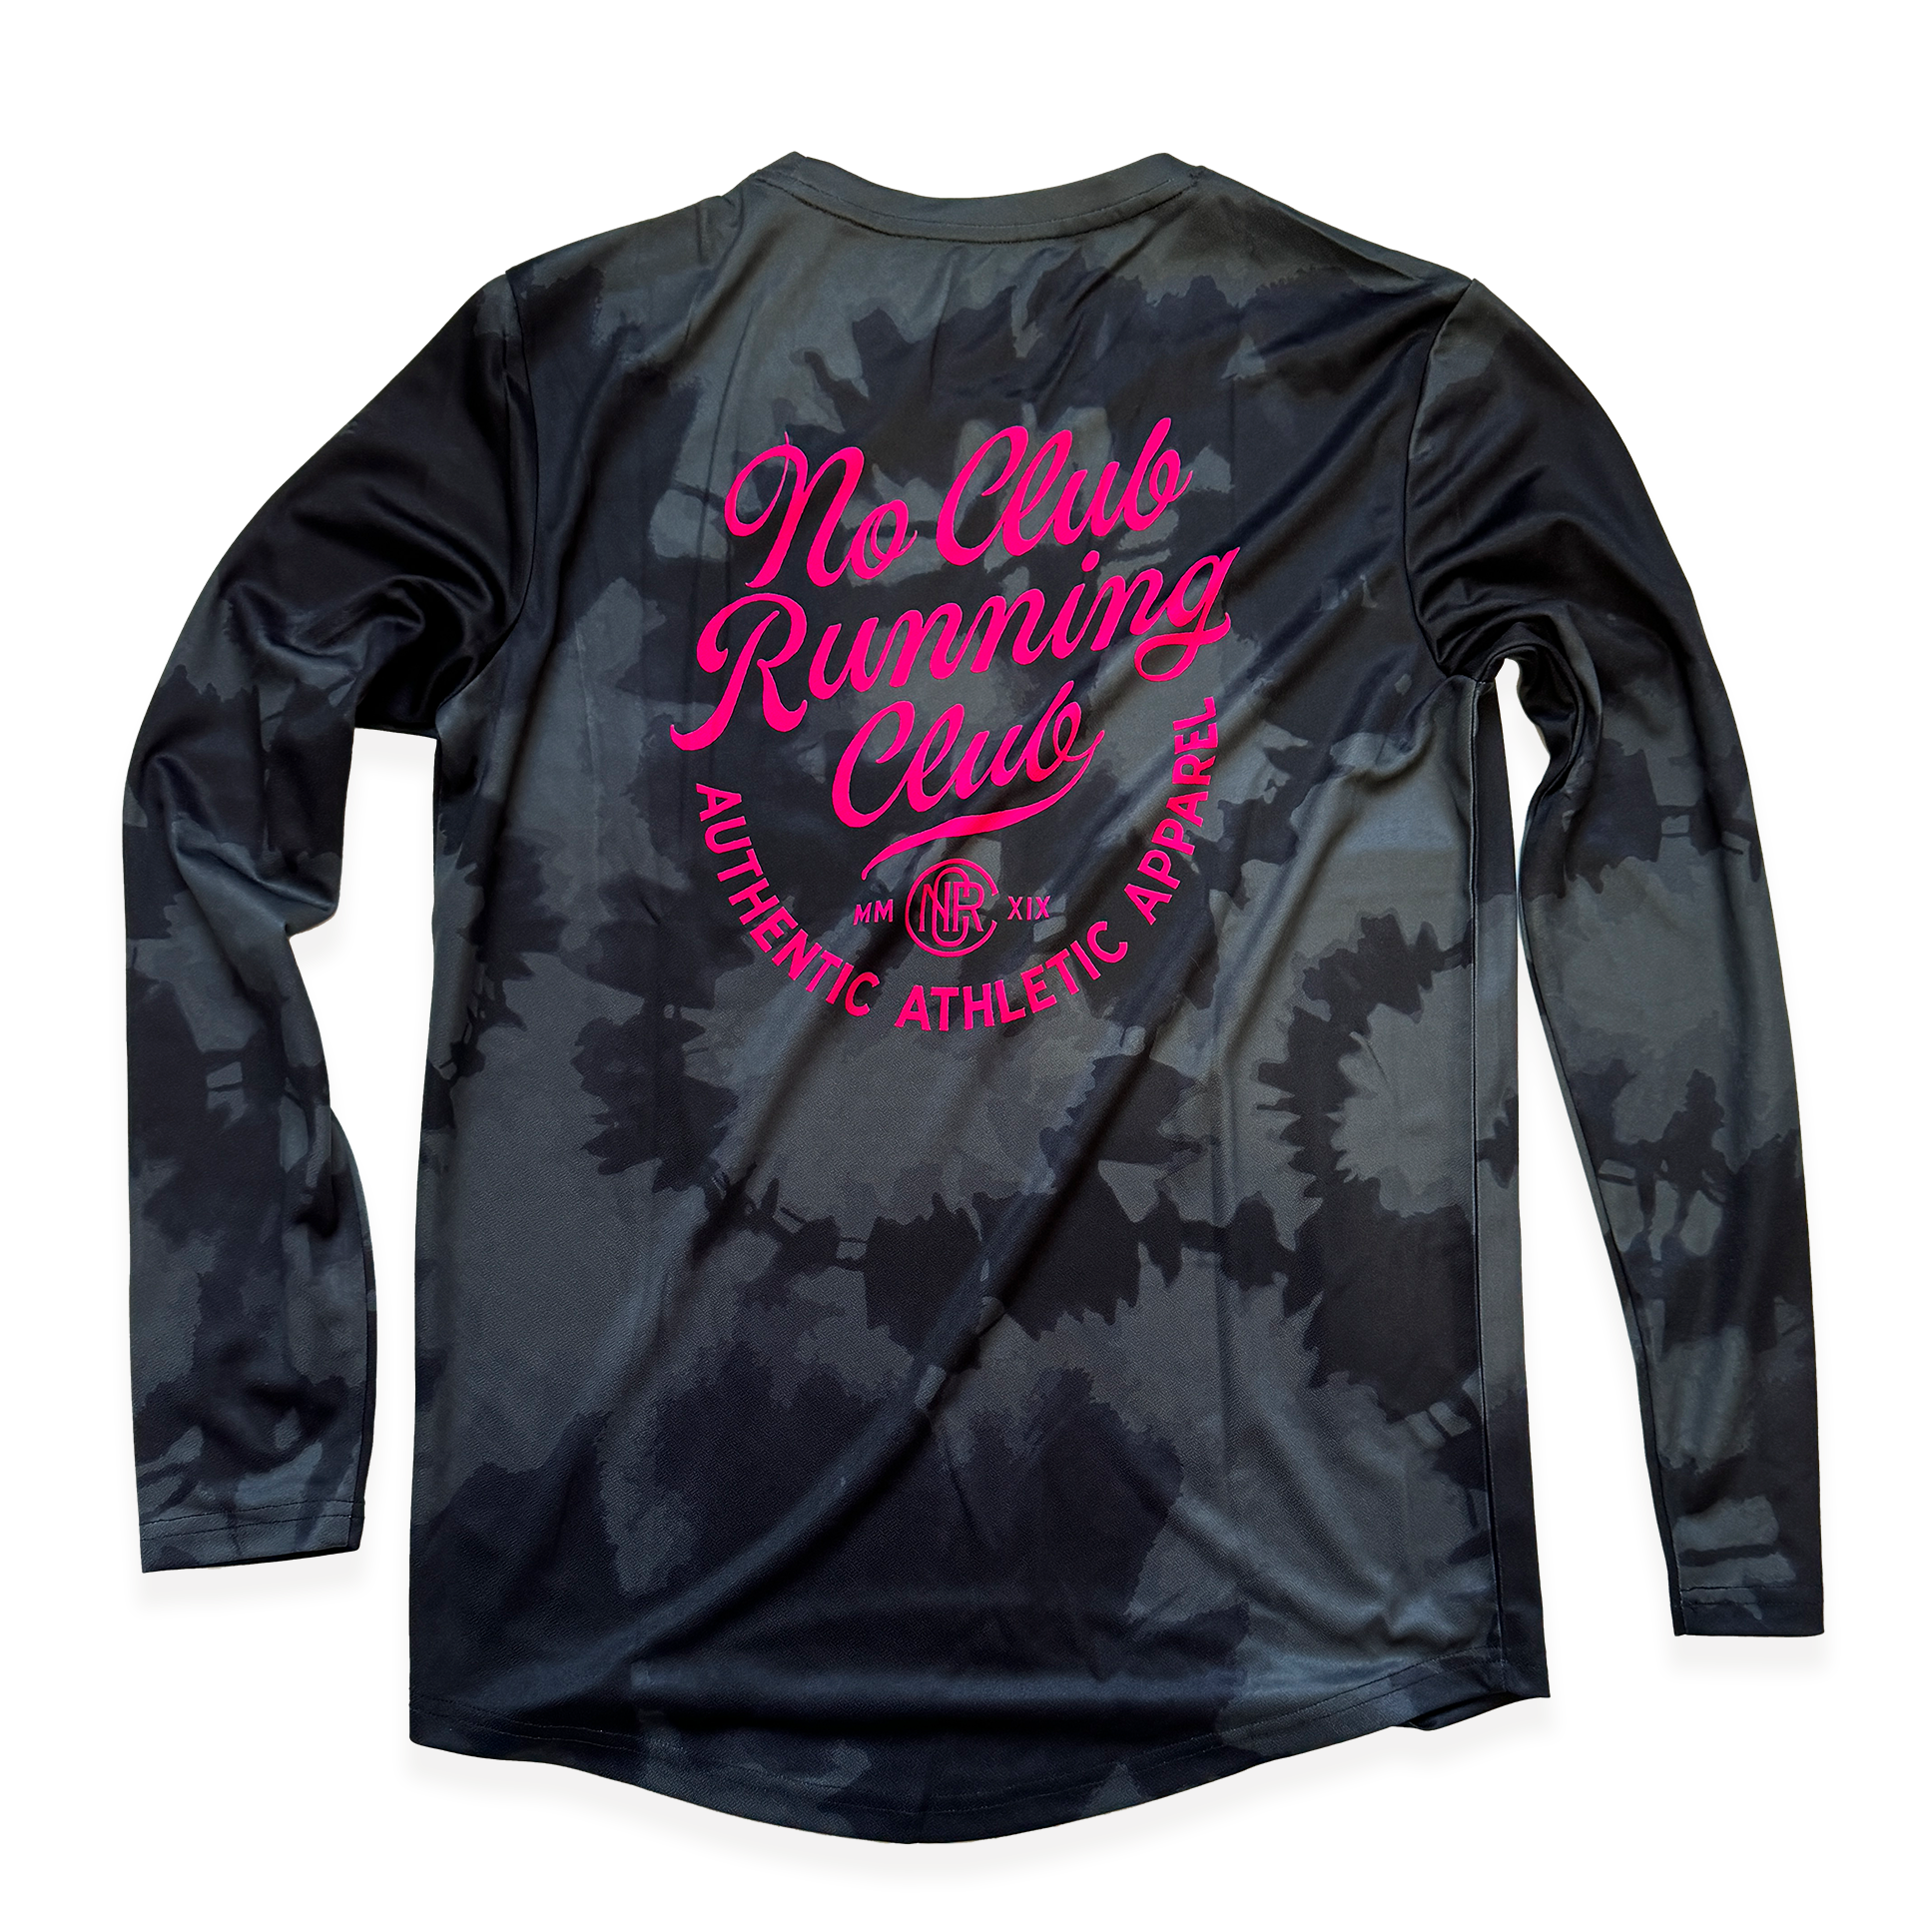 NCRC: Unisex Fits: Heritage Tie Dye -  Long Sleeve Training Jersey - Charcoal/Black/Pink